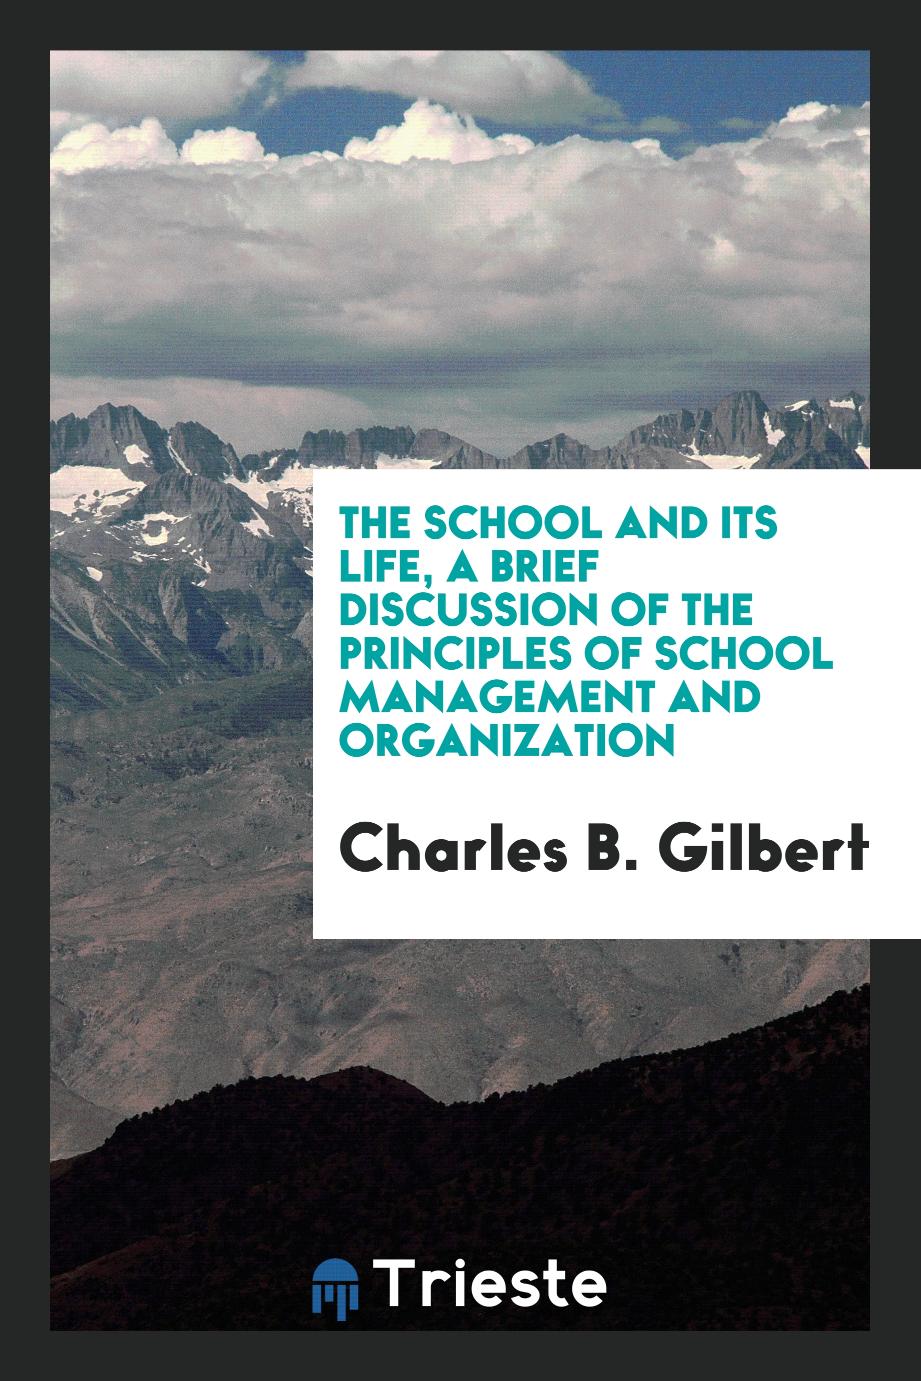 The school and its life, a brief discussion of the principles of school management and organization